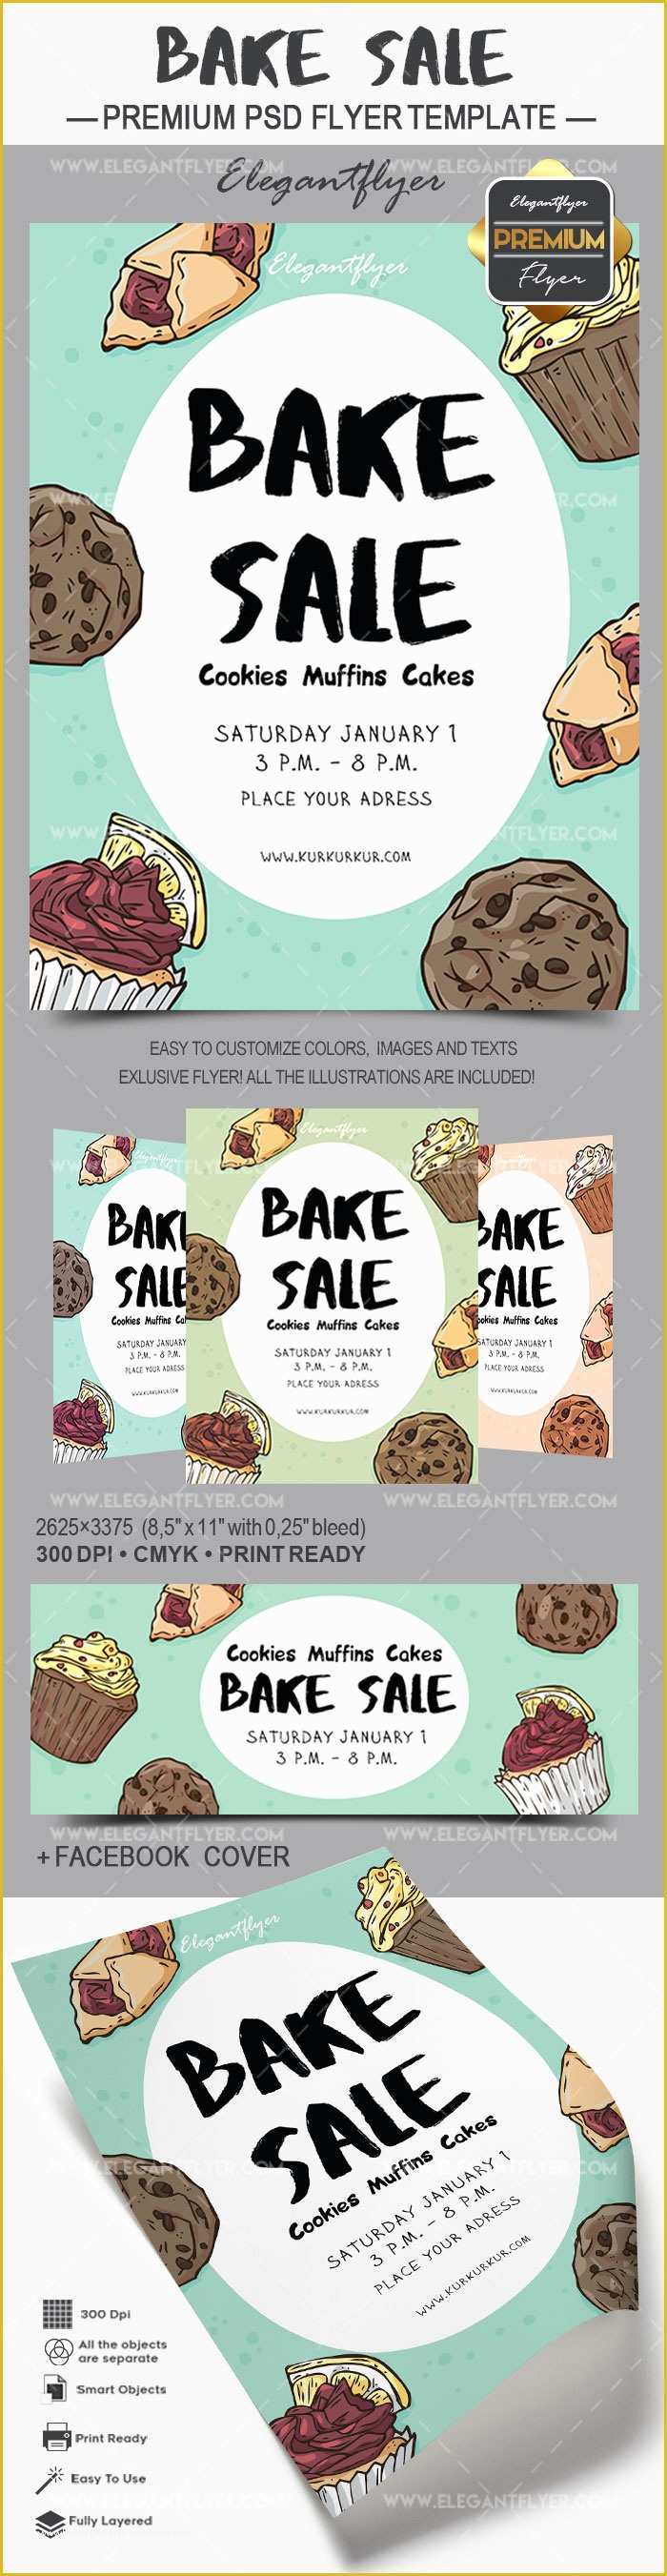 Cookie Flyer Template Free Of Flyer for Bake Sale Cookies Muffins Cakes – by Elegantflyer